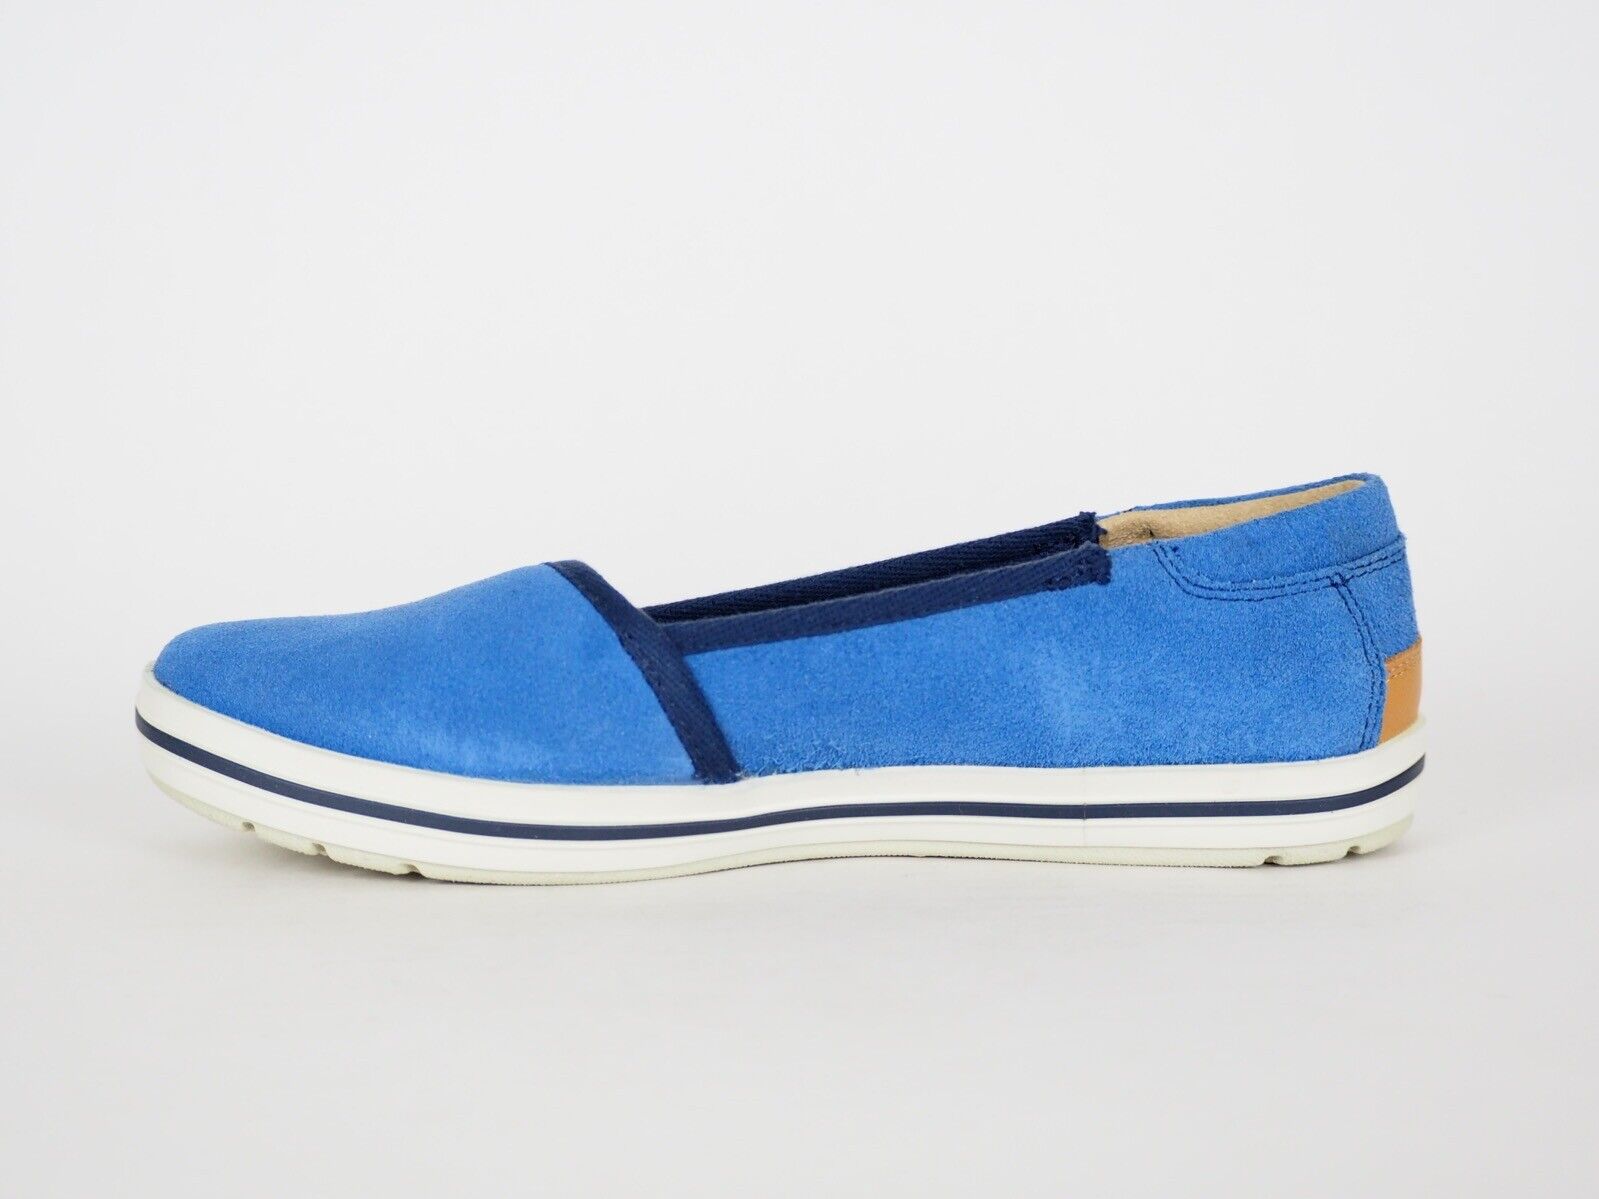 Womens Timberland EK Casco Bay 8829A Blue Suede Slip On Shoes UK 4 - London Top Style